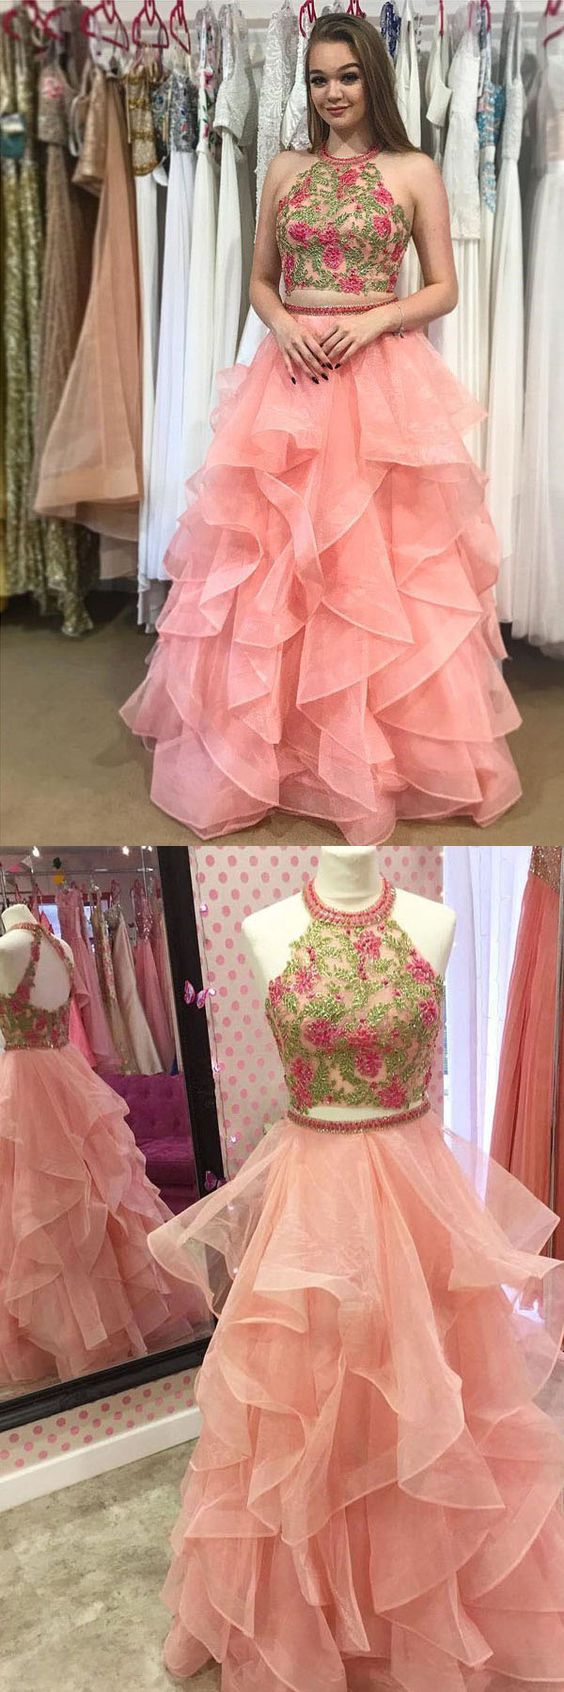 Two Piece Round Neck Tiered Pink Open Back Prom Dress With Appliques M0825